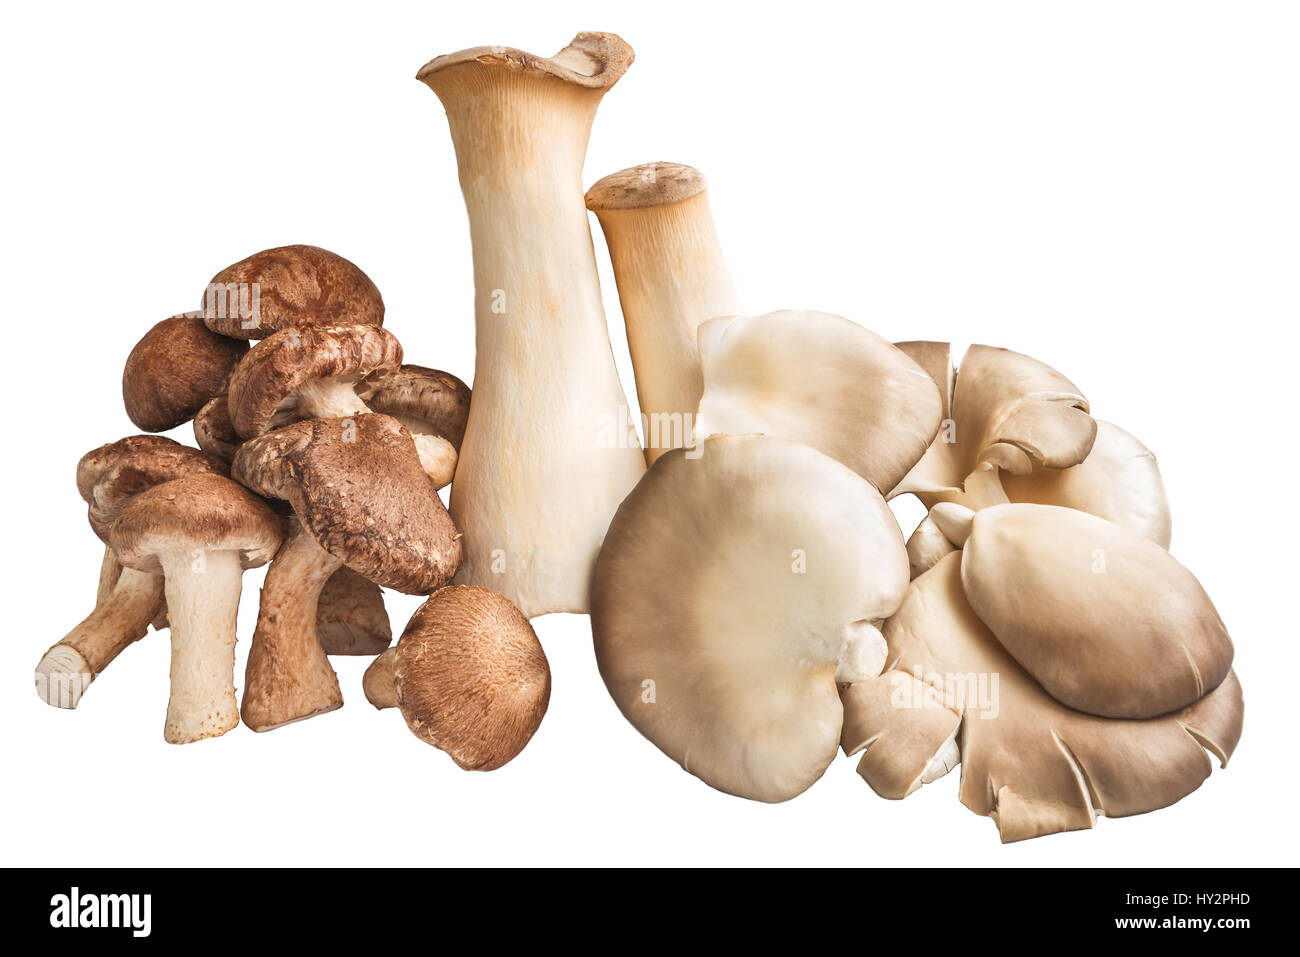 A bunch of shiitake mushrooms, ergings and oysters on a white background. Stock Photo